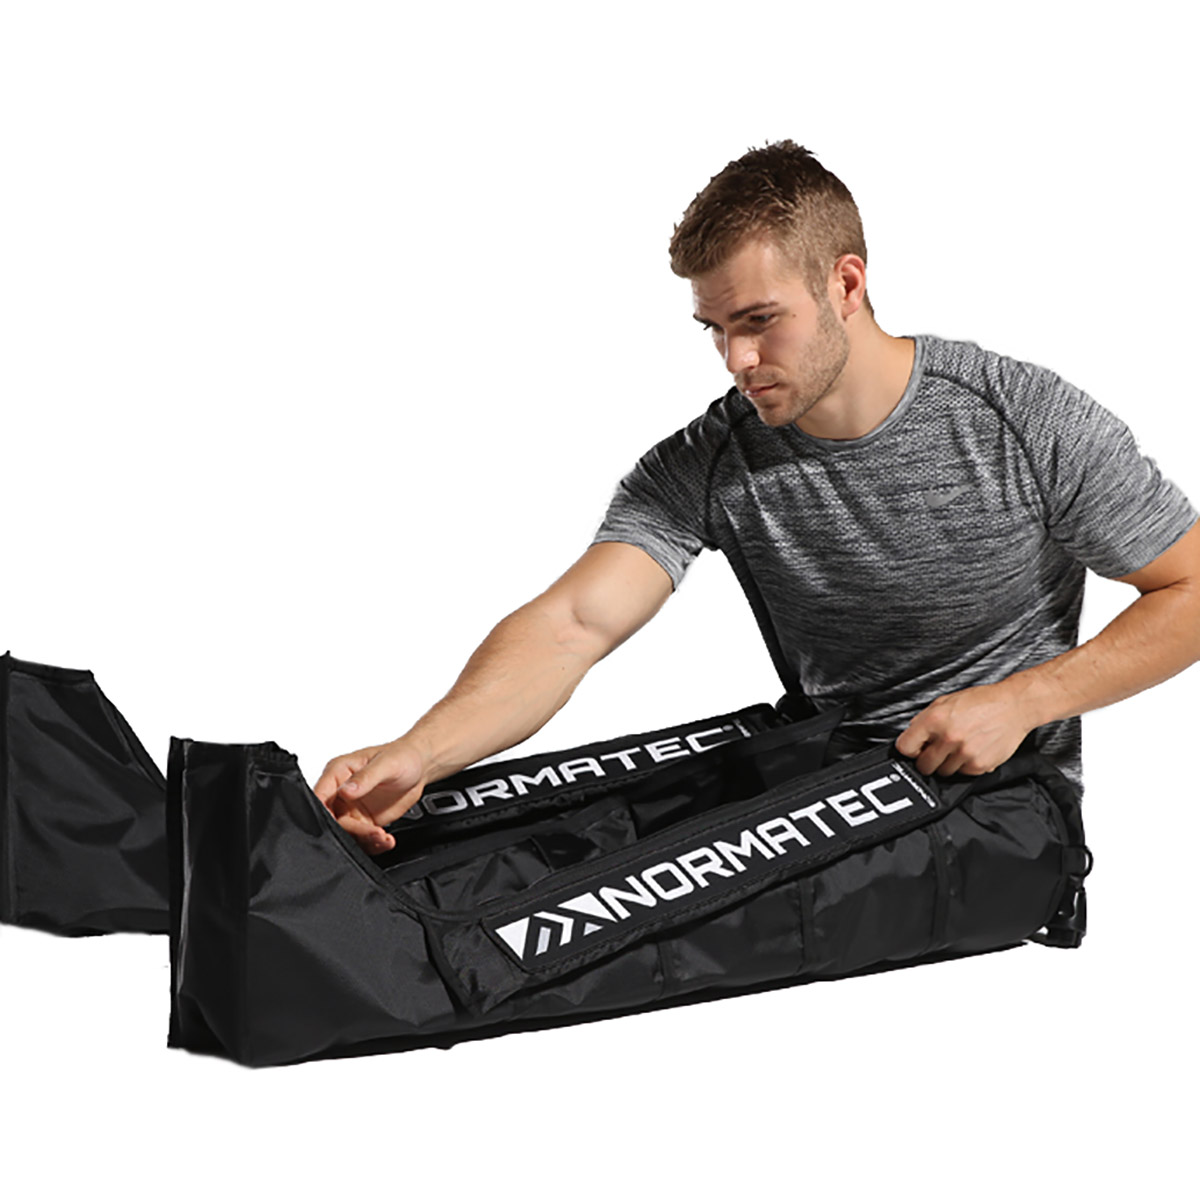 NormaTec PULSE 2.0 Leg Recovery System, , large image number null